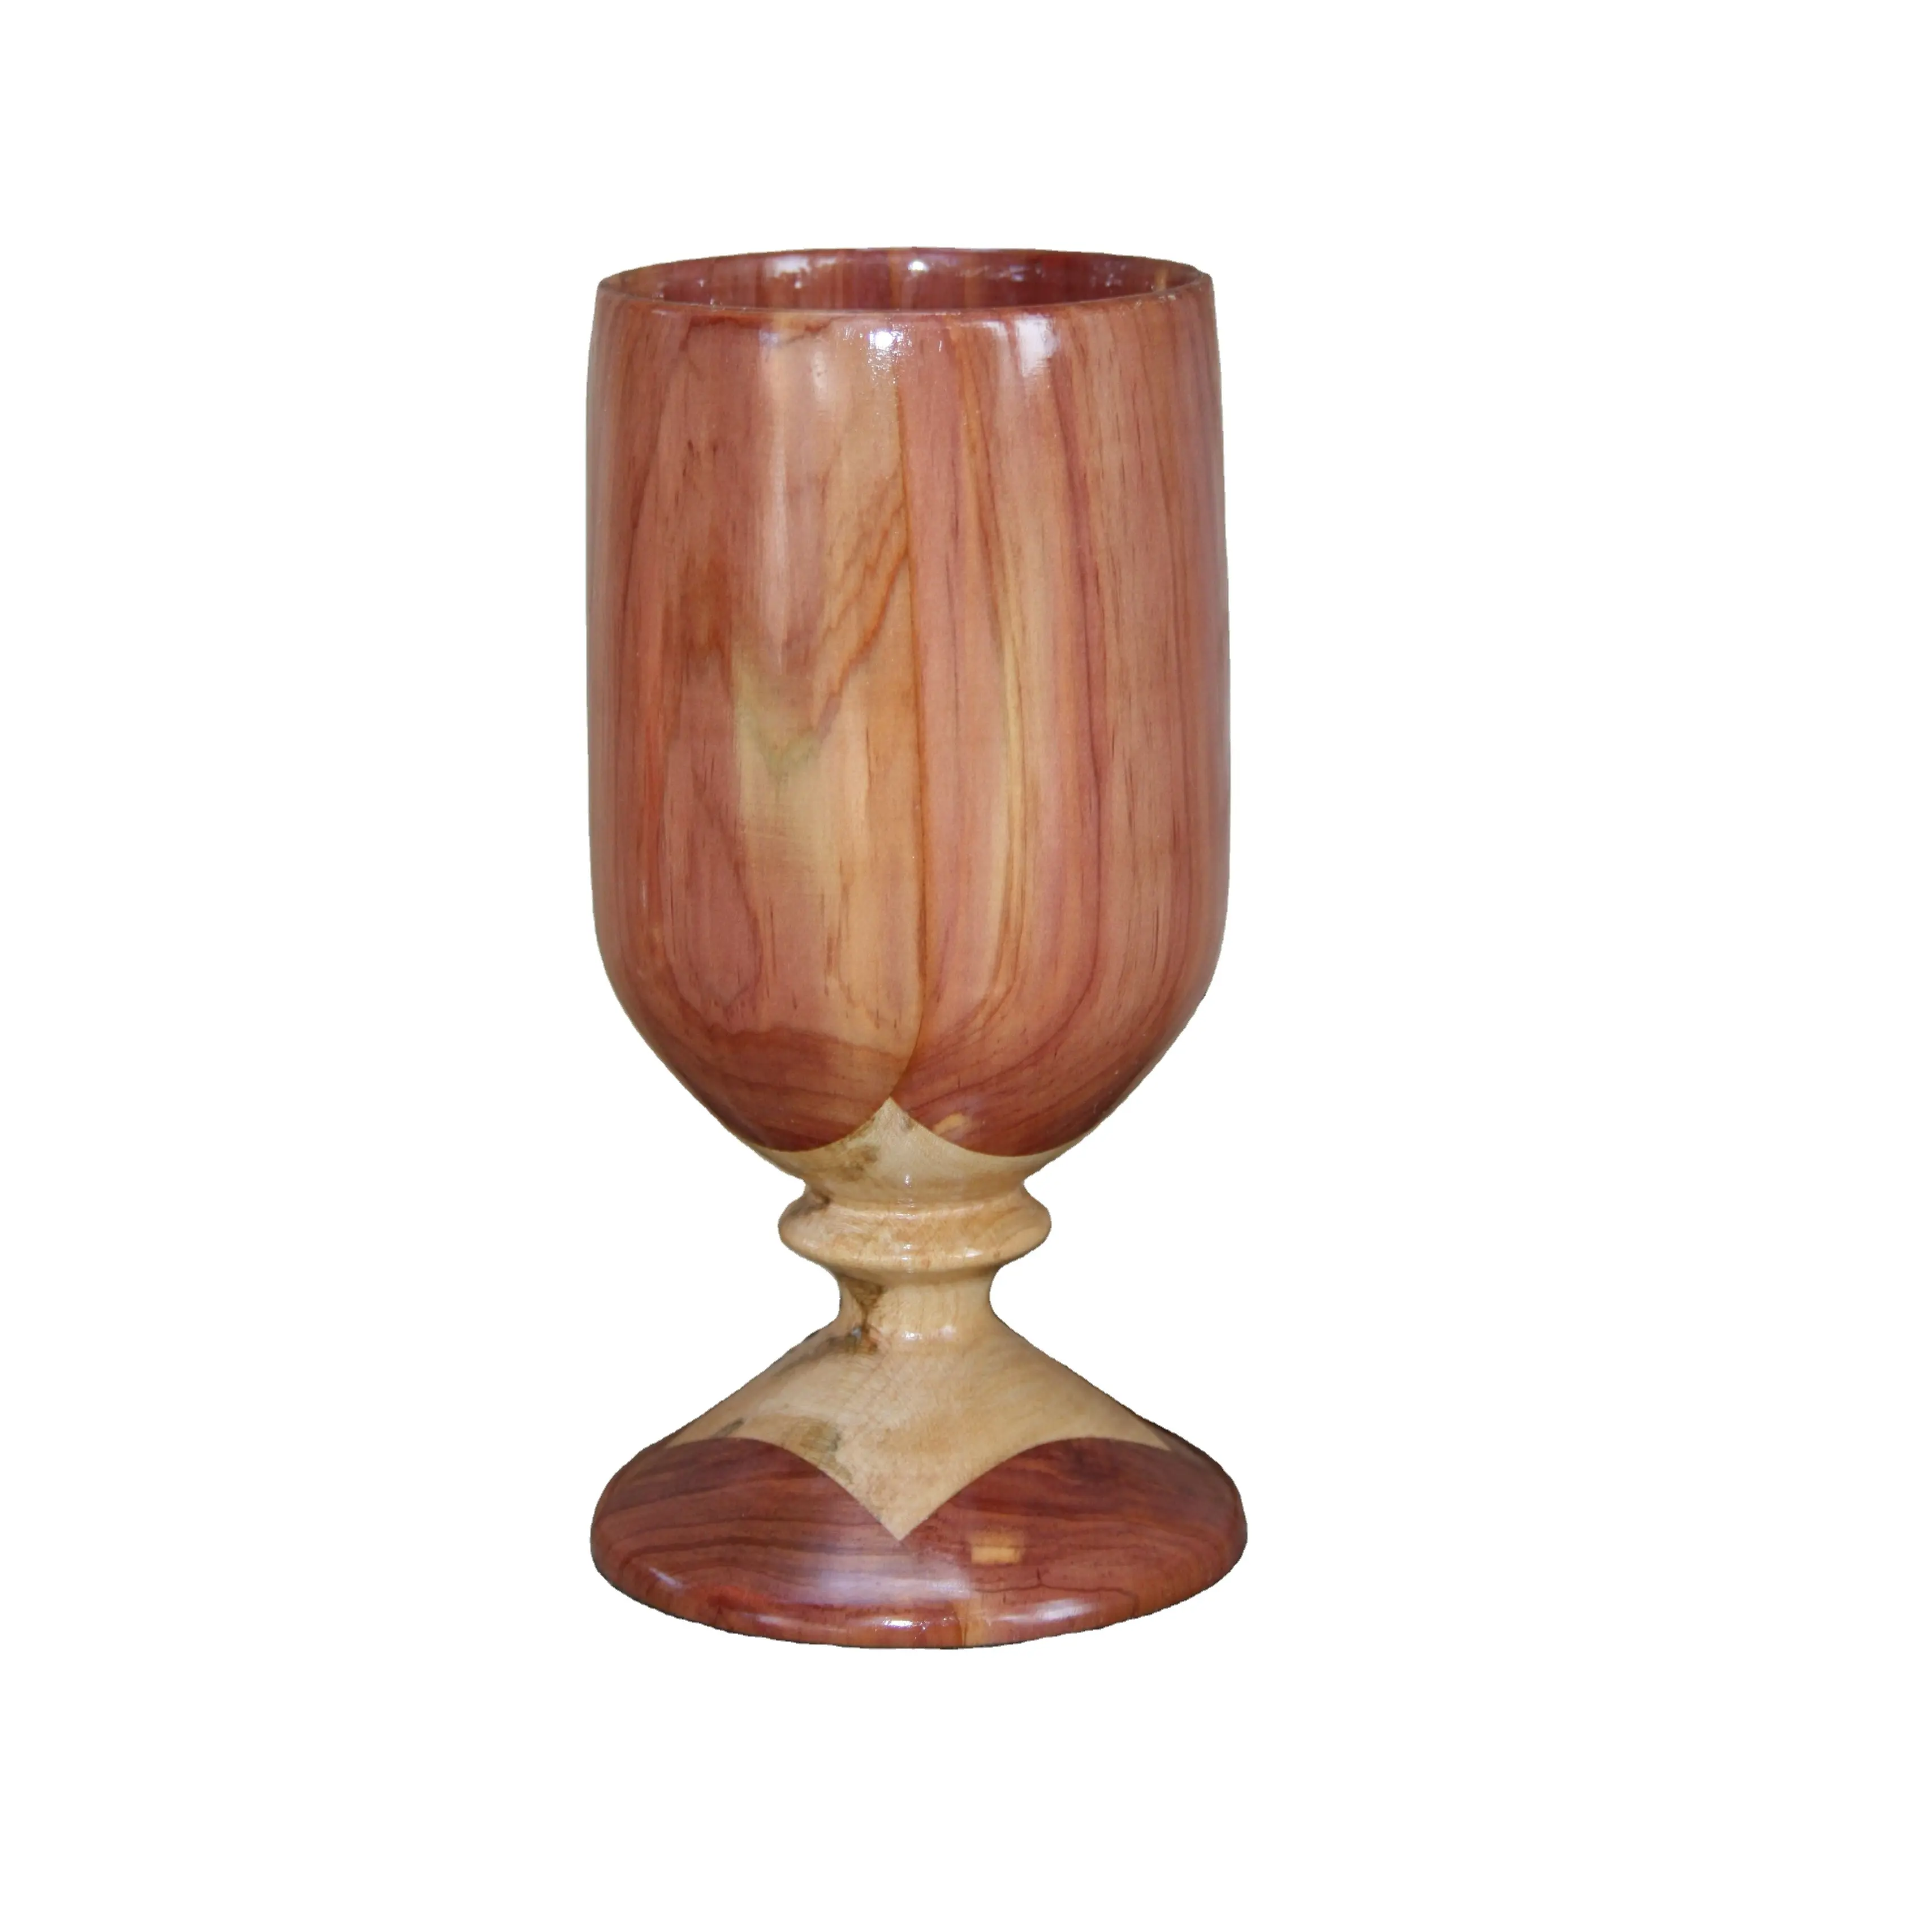 Kitchen European Style wooden glass vintage solid wood goblet red cup custom logo kitchen & tabletop kitchen gadgets